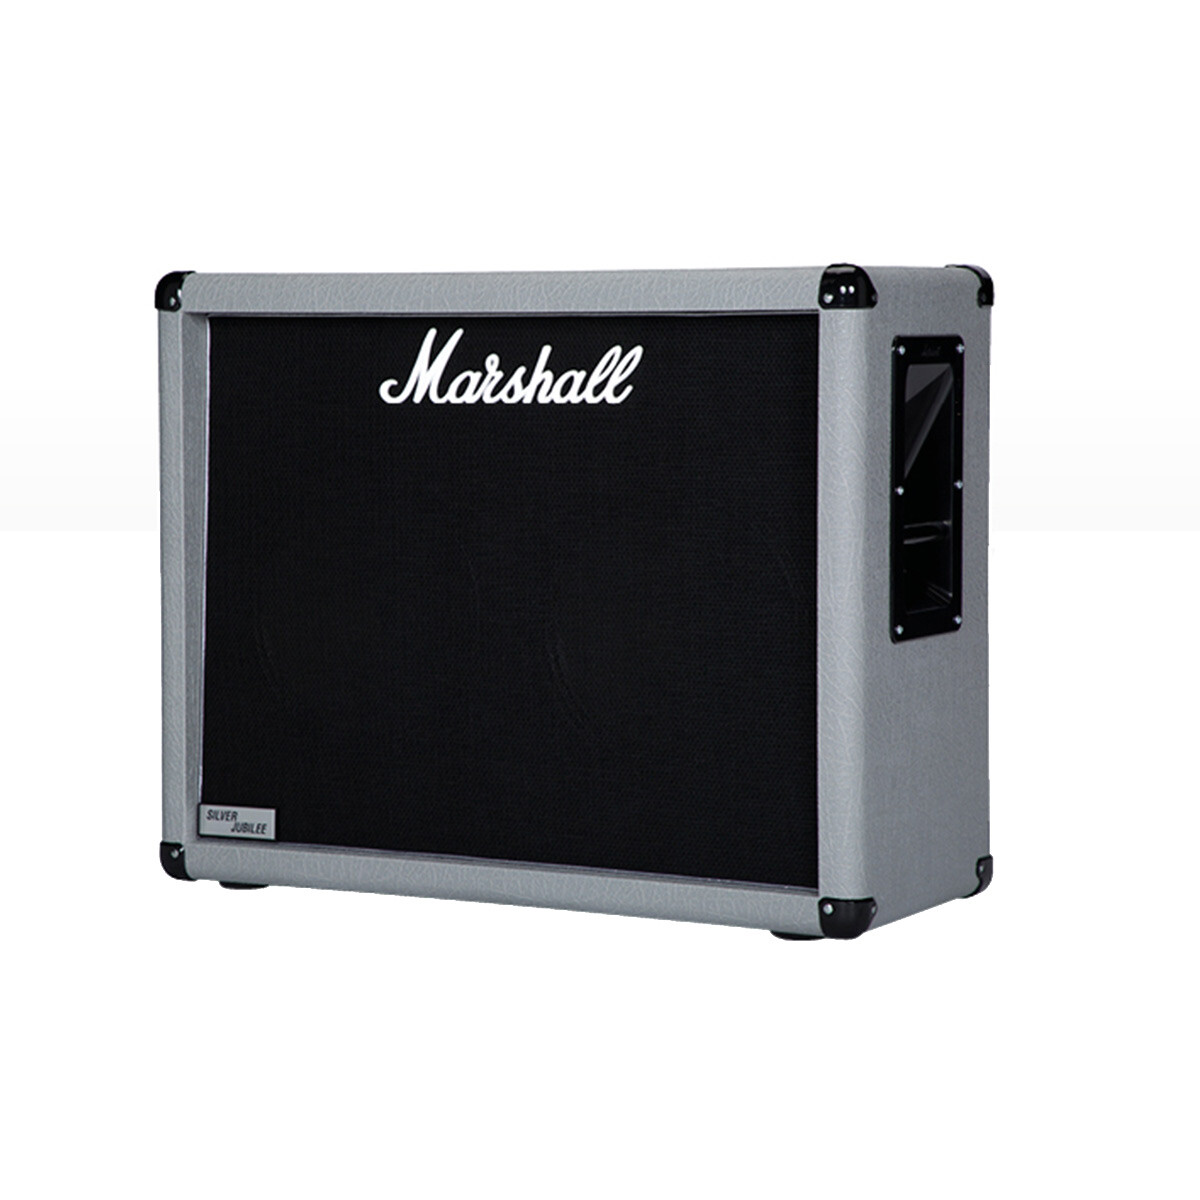 (l) Cabinet Guitarra/marshall Silver Jubile 140w 2x12 